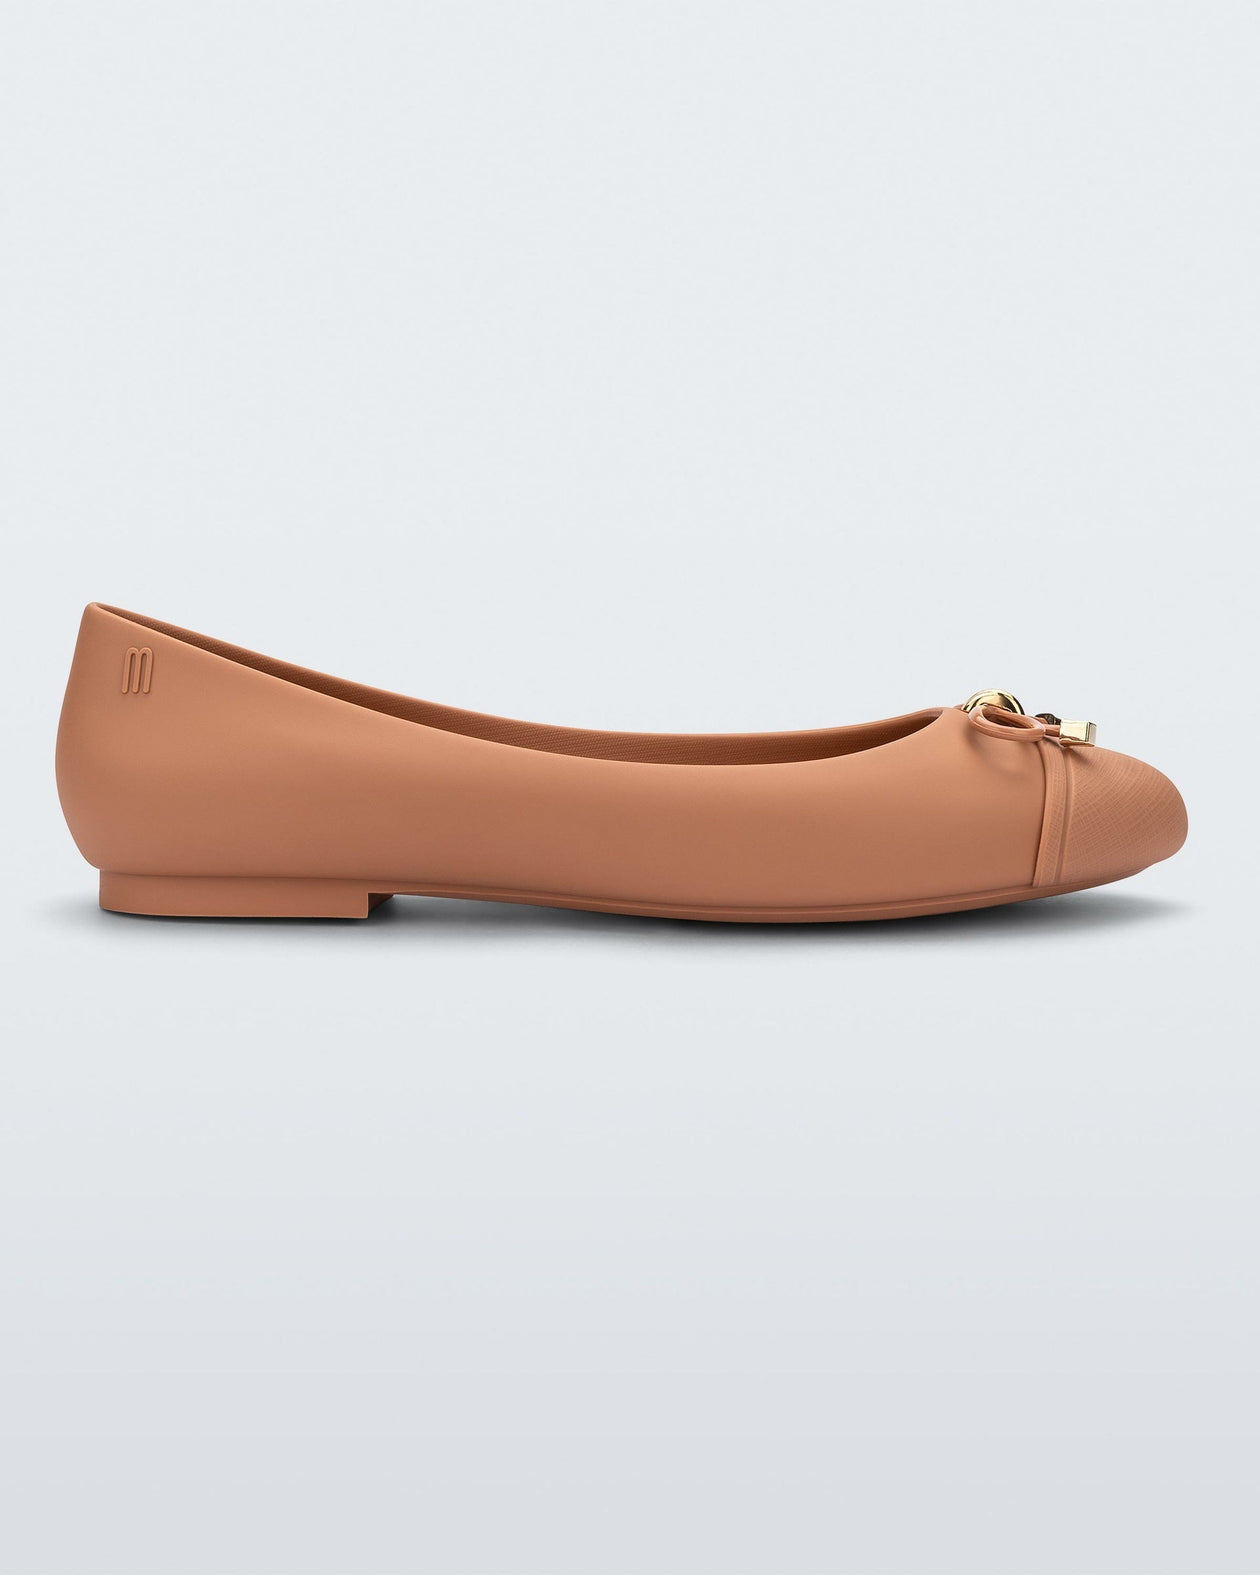 Side view of a dark beige Melissa flat with a beige bow detail with gold accents on the toe